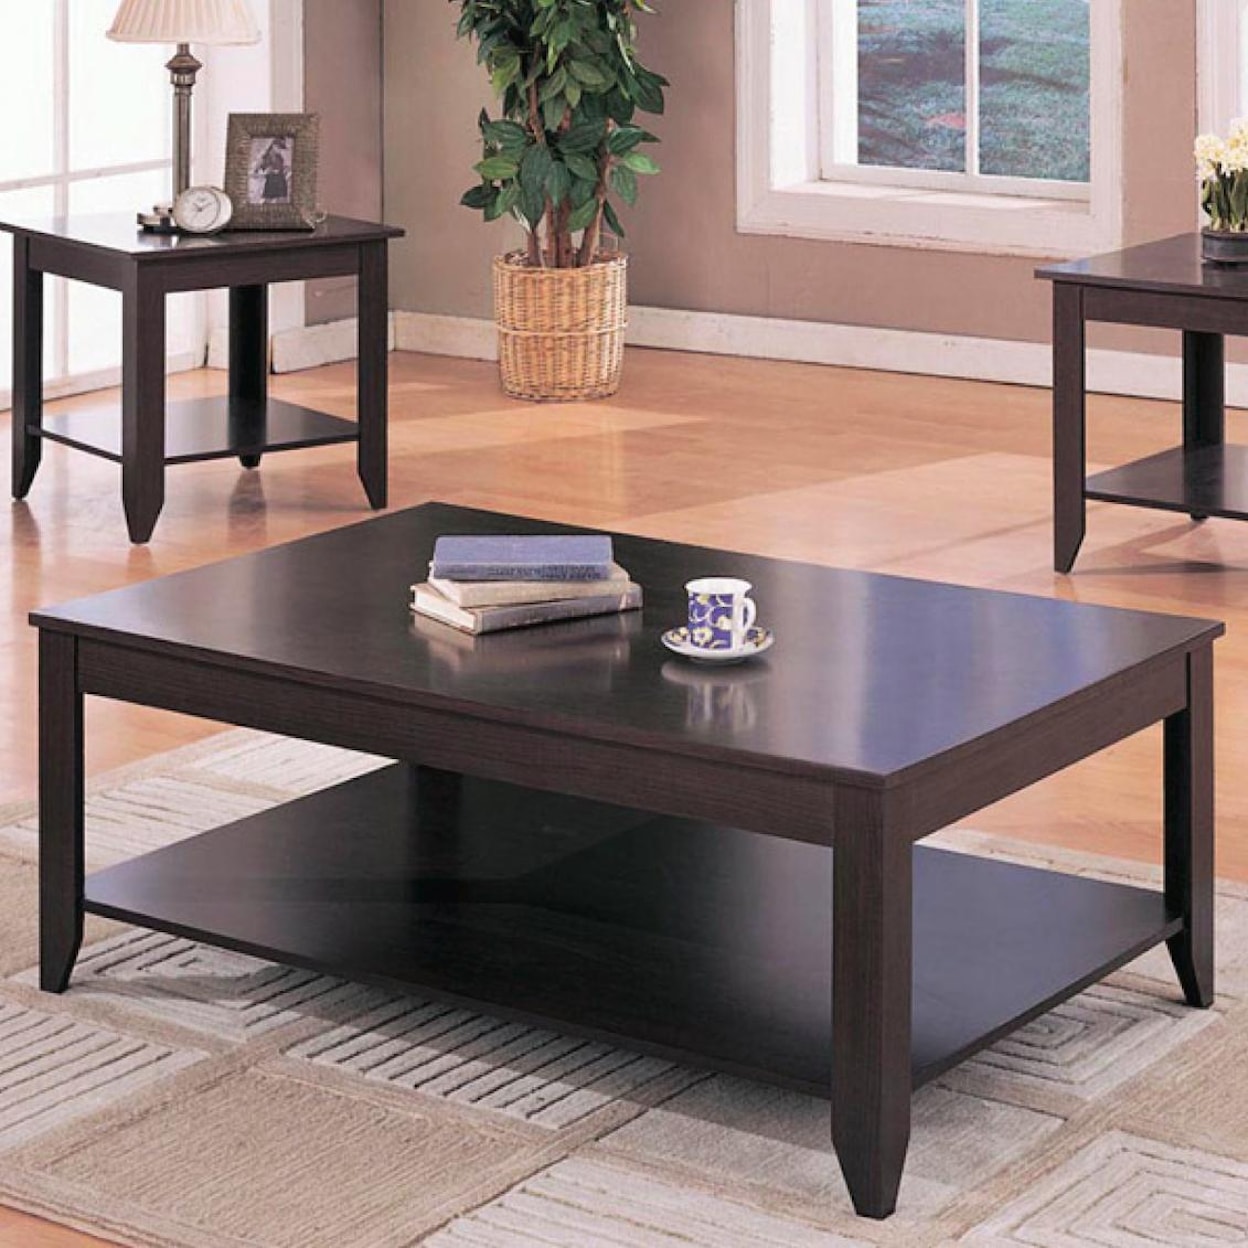 Coaster Occasional Table Sets CASUAL BROWN 3 PC OCCASIONAL SET |